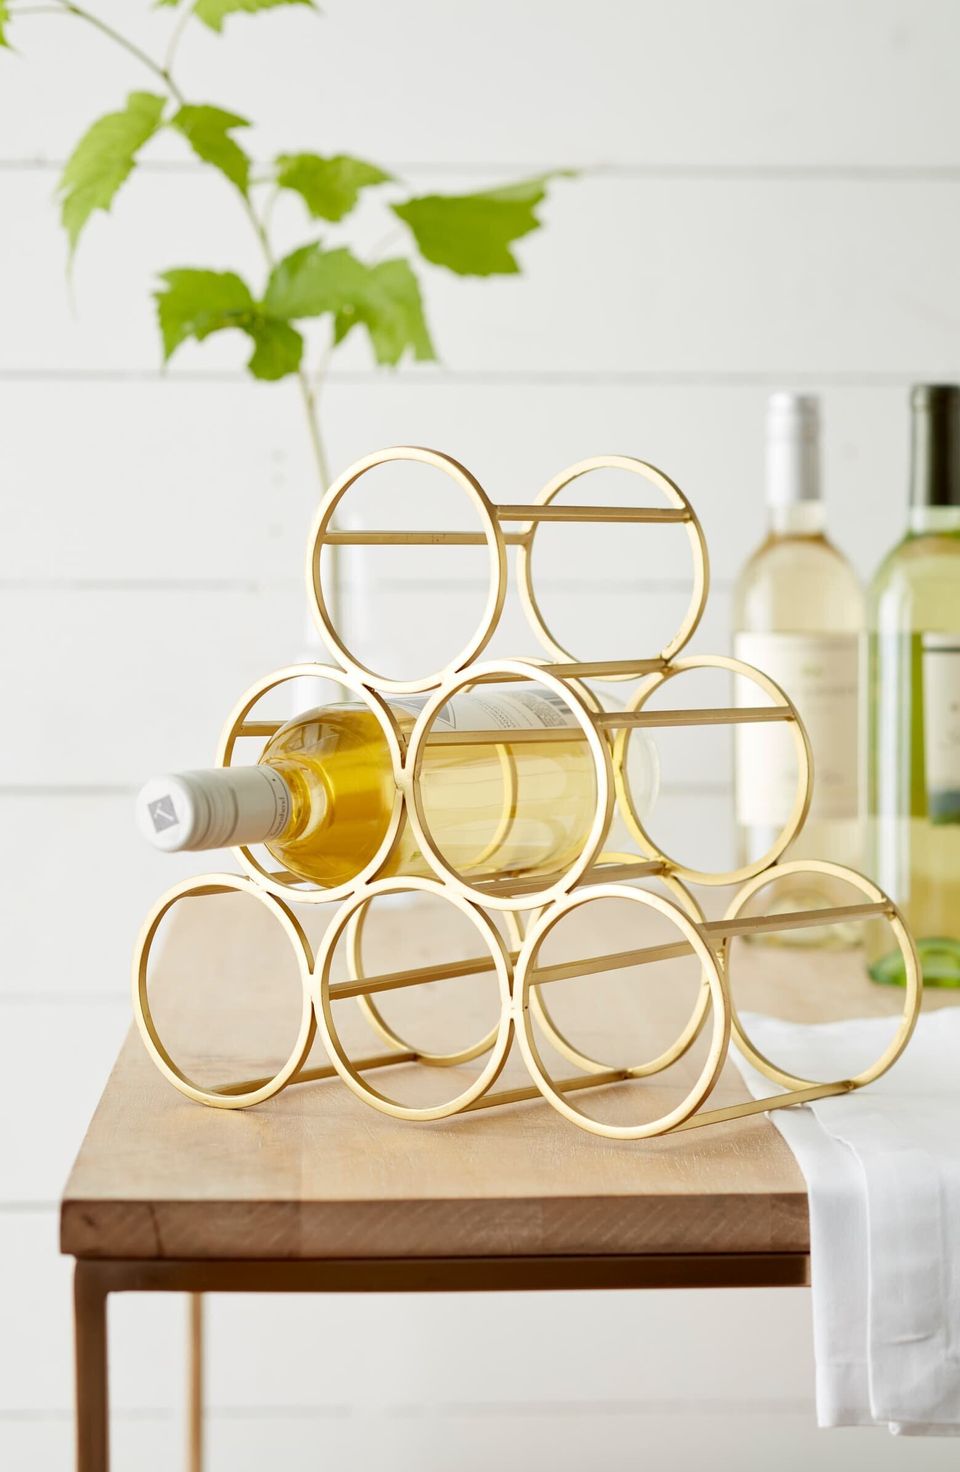 These Small Countertop Wine Racks Won't Take Up Much Kitchen Space